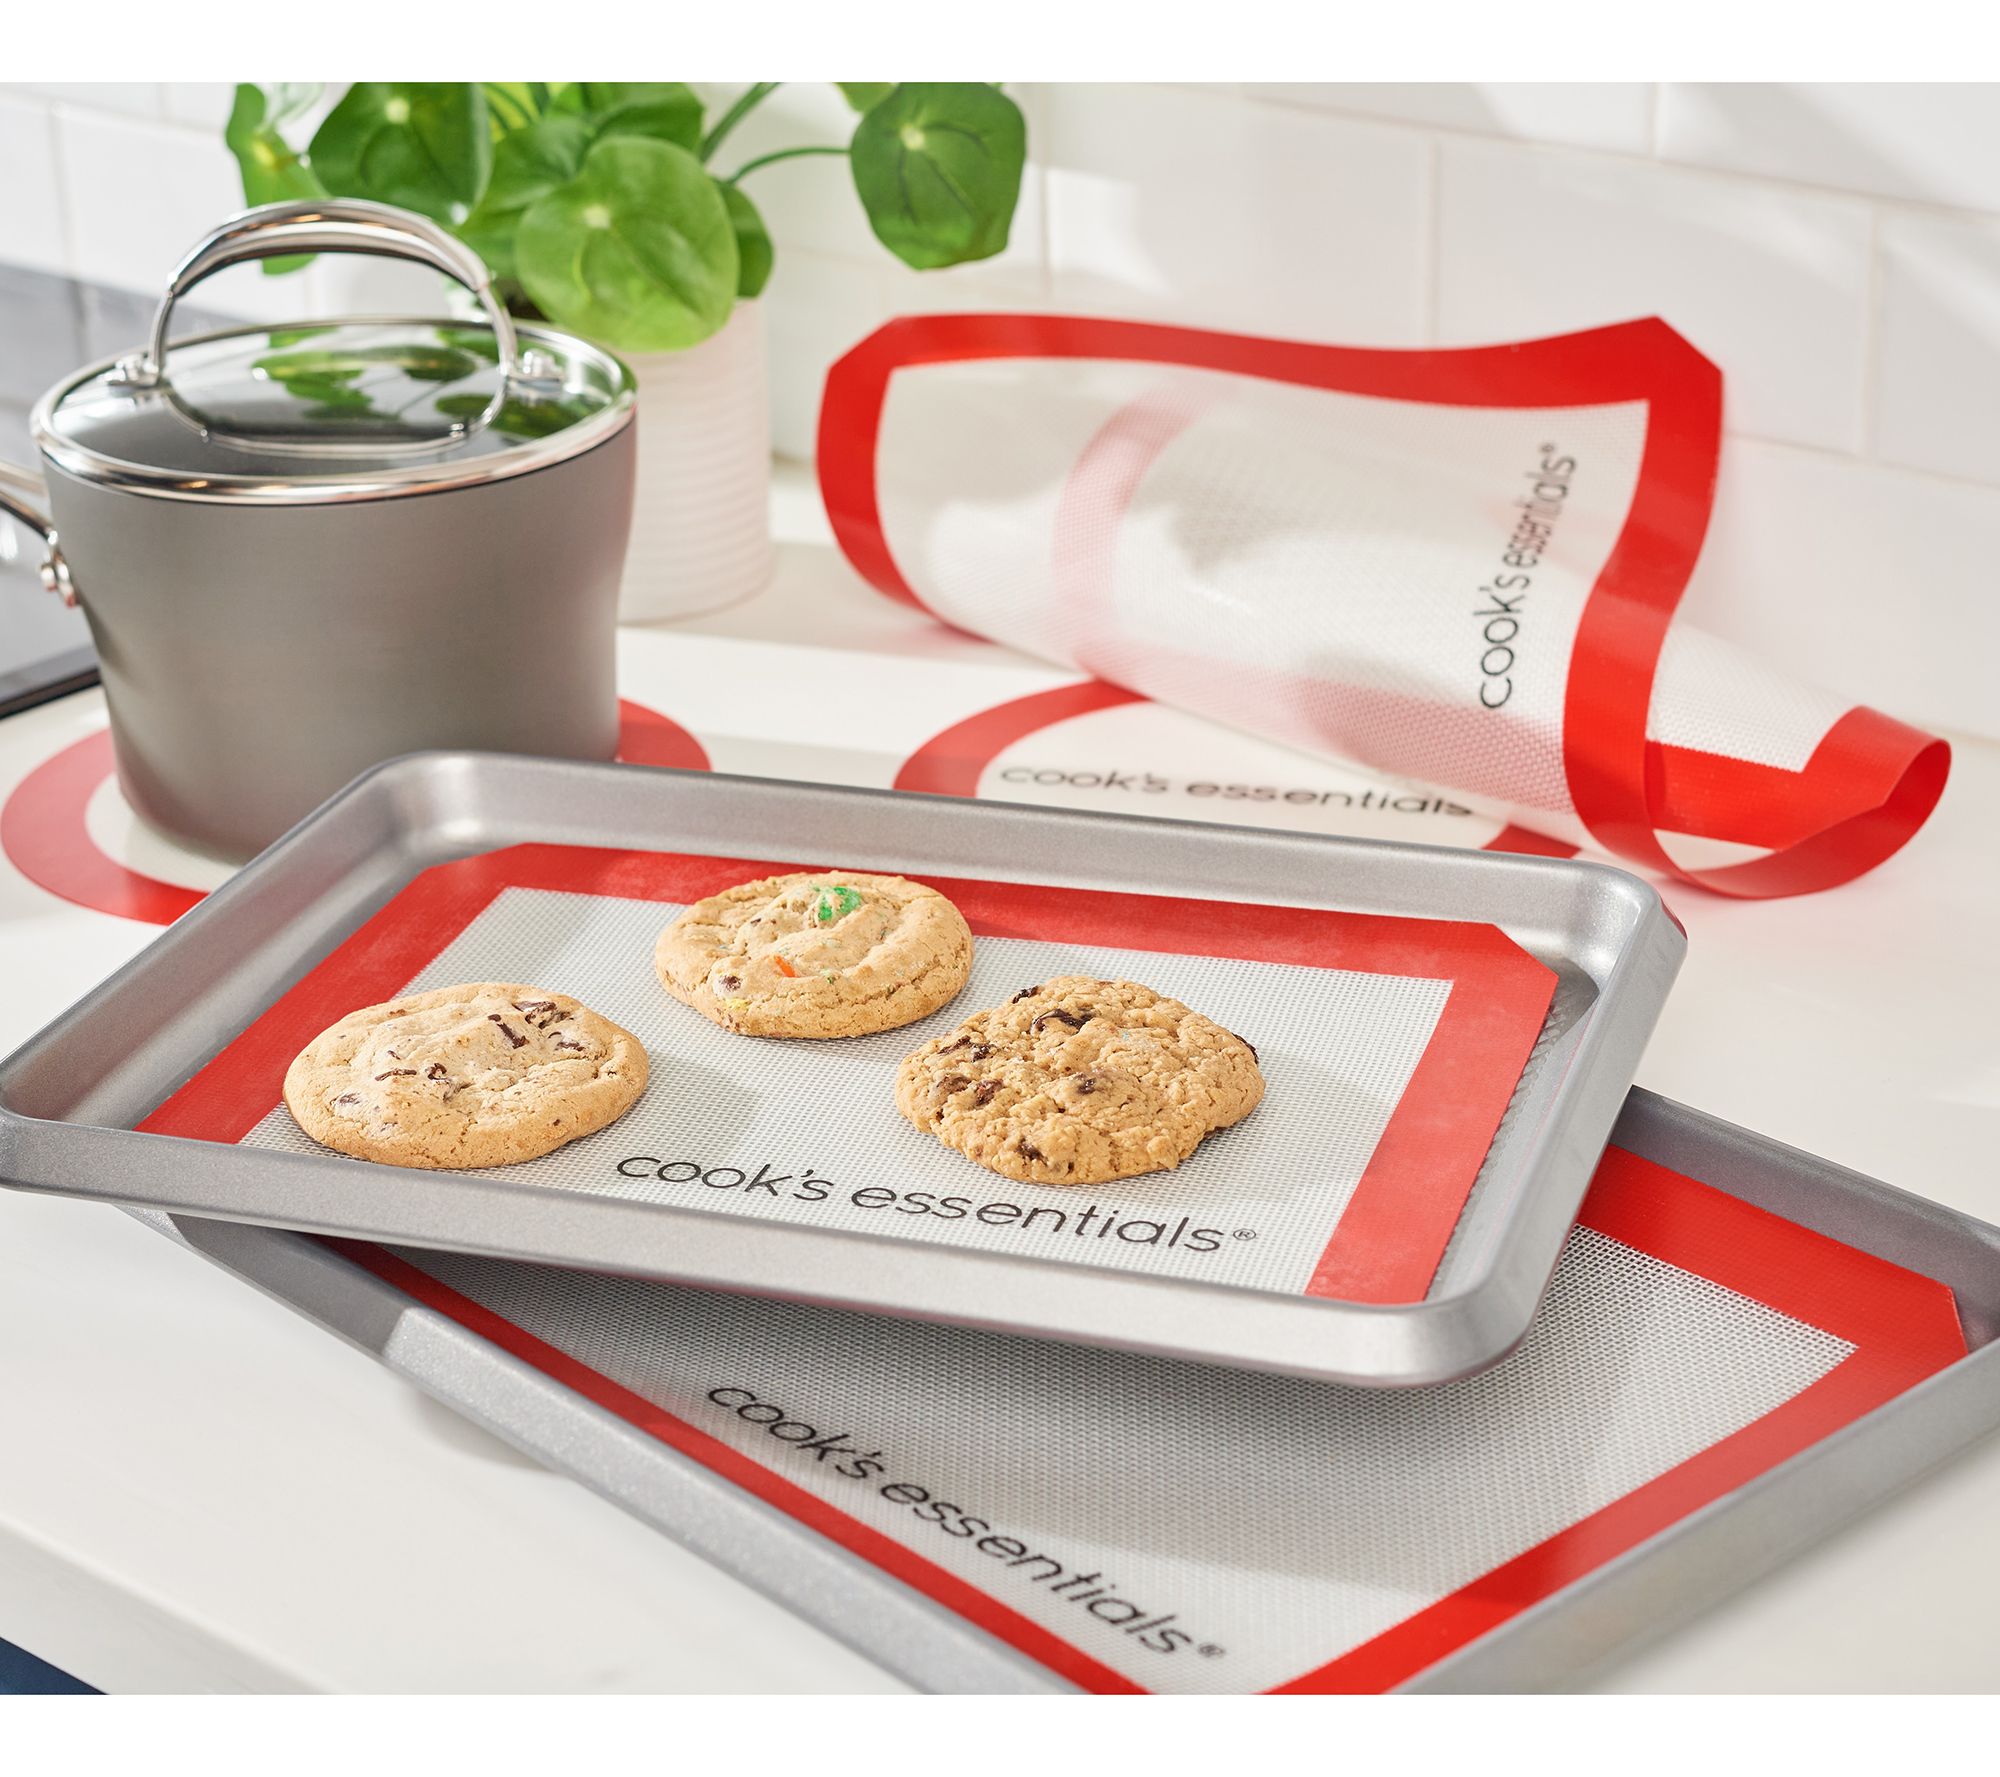 Silicone Baking Mats Non Stick Breads Chicken Cookies Bake Recipe Set of two New 